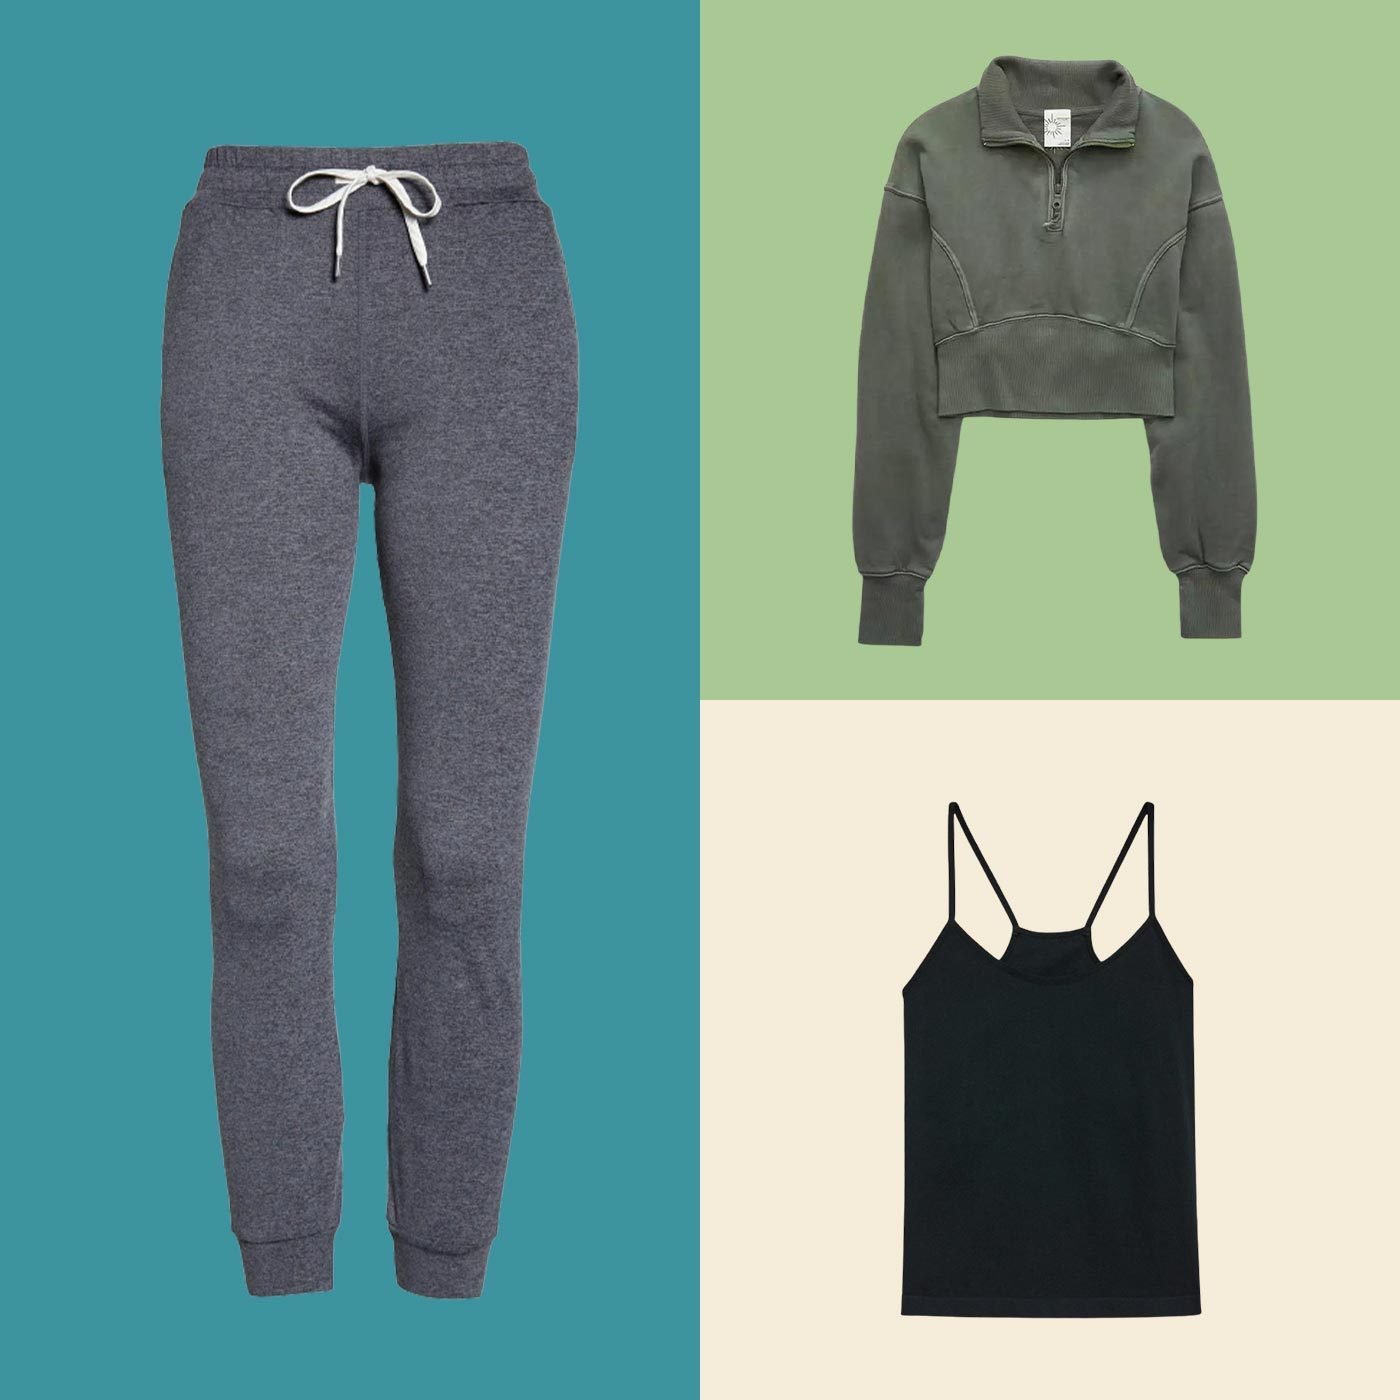 https://www.rd.com/wp-content/uploads/2023/01/The-Best-Womens-Activewear-at-Every-Price-Point_FT.jpg?fit=700%2C700